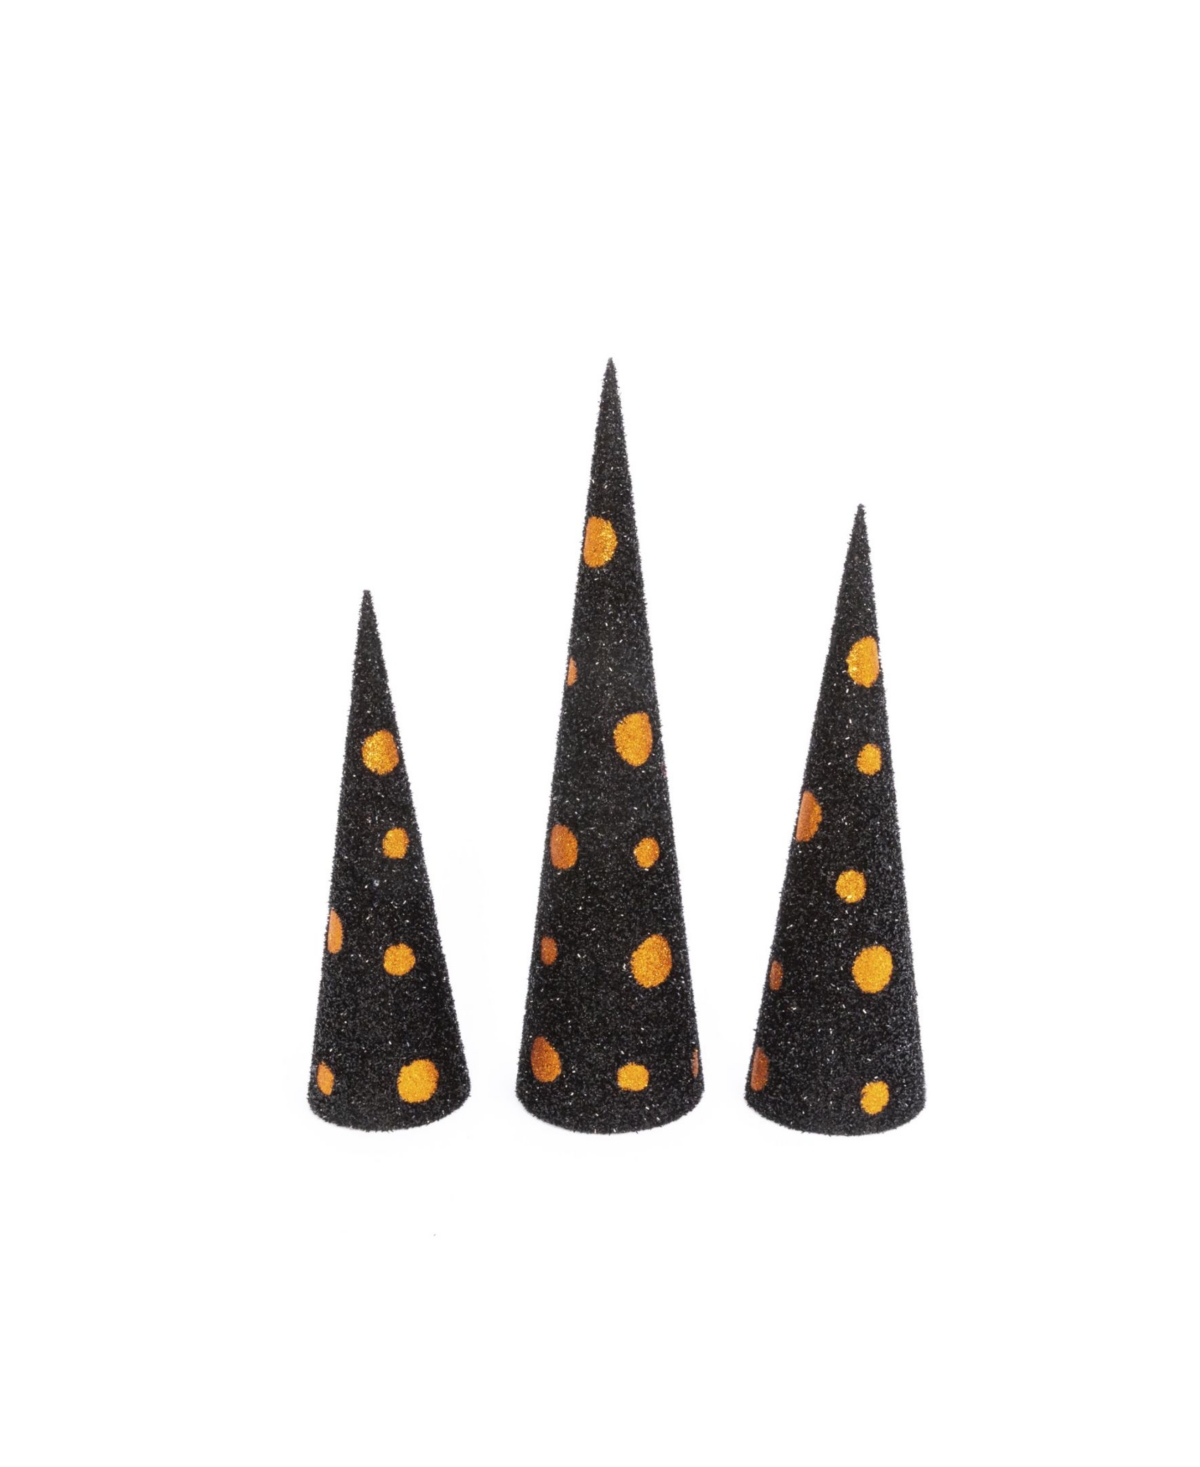 Assorted Glitter Halloween Cone Trees Set, 3 Pieces - Black